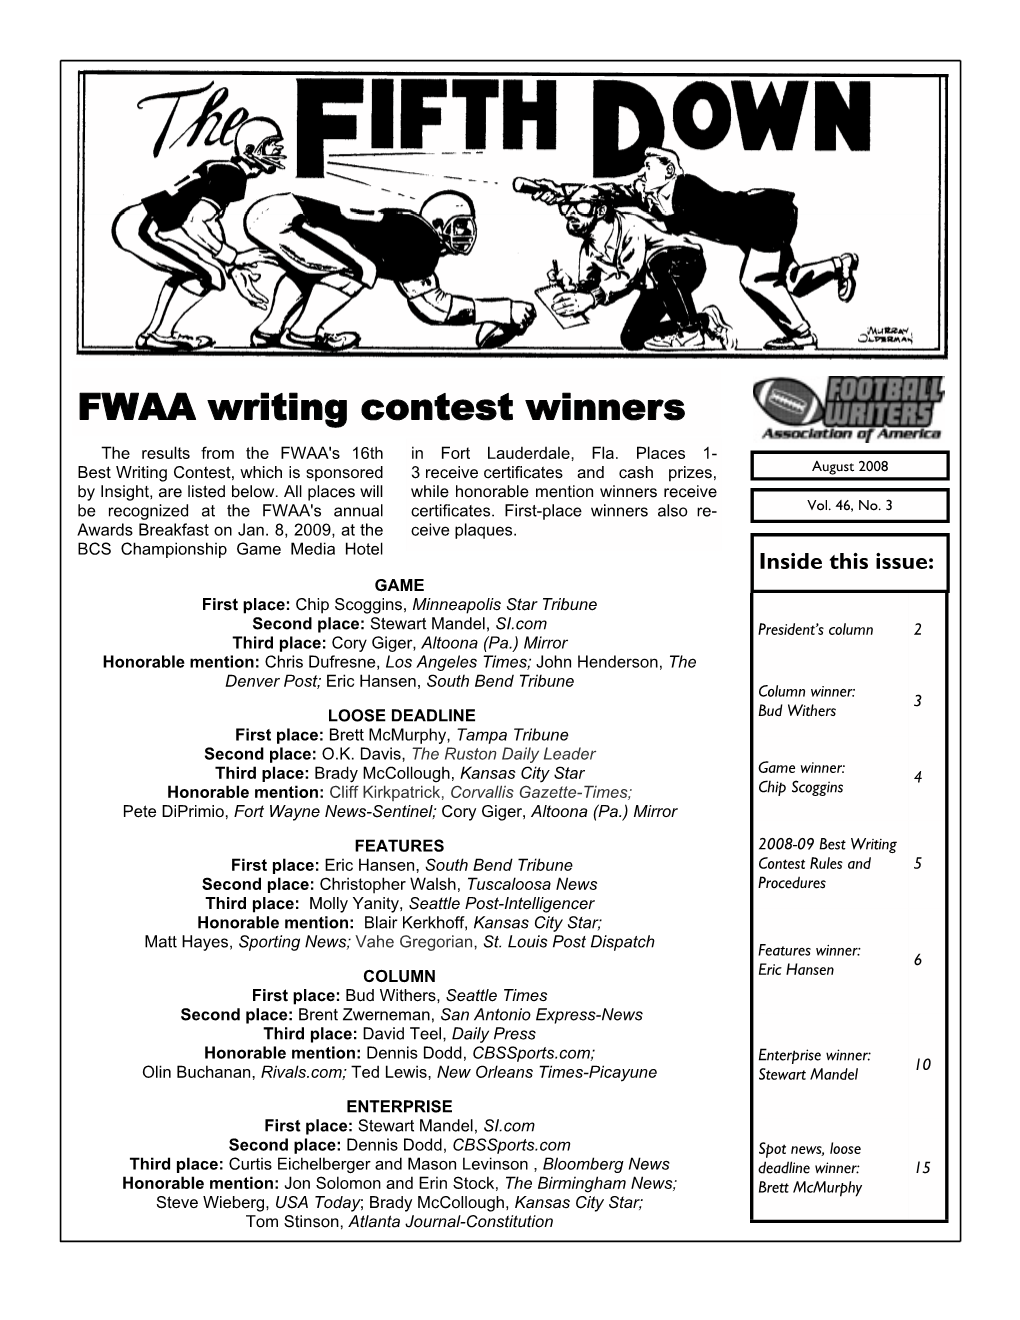 FWAA Writing Contest Winners the Results from the FWAA's 16Th in Fort Lauderdale, Fla